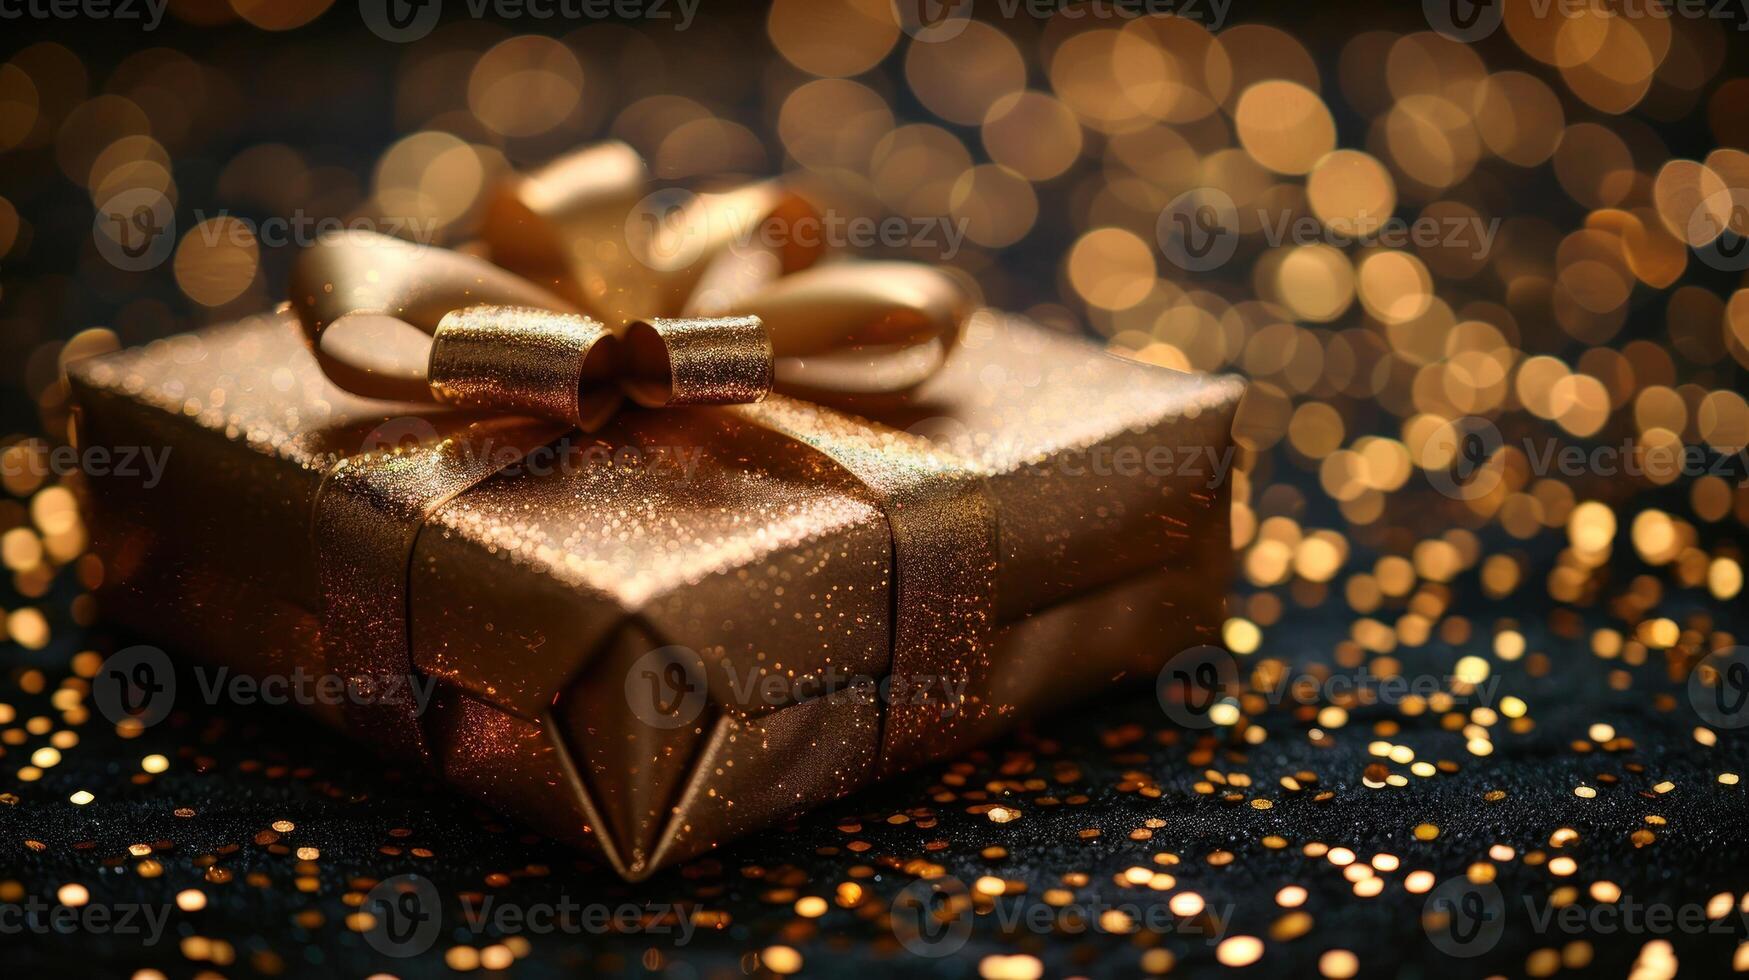 A shiny gold gift box adorned with a decorative bow photo